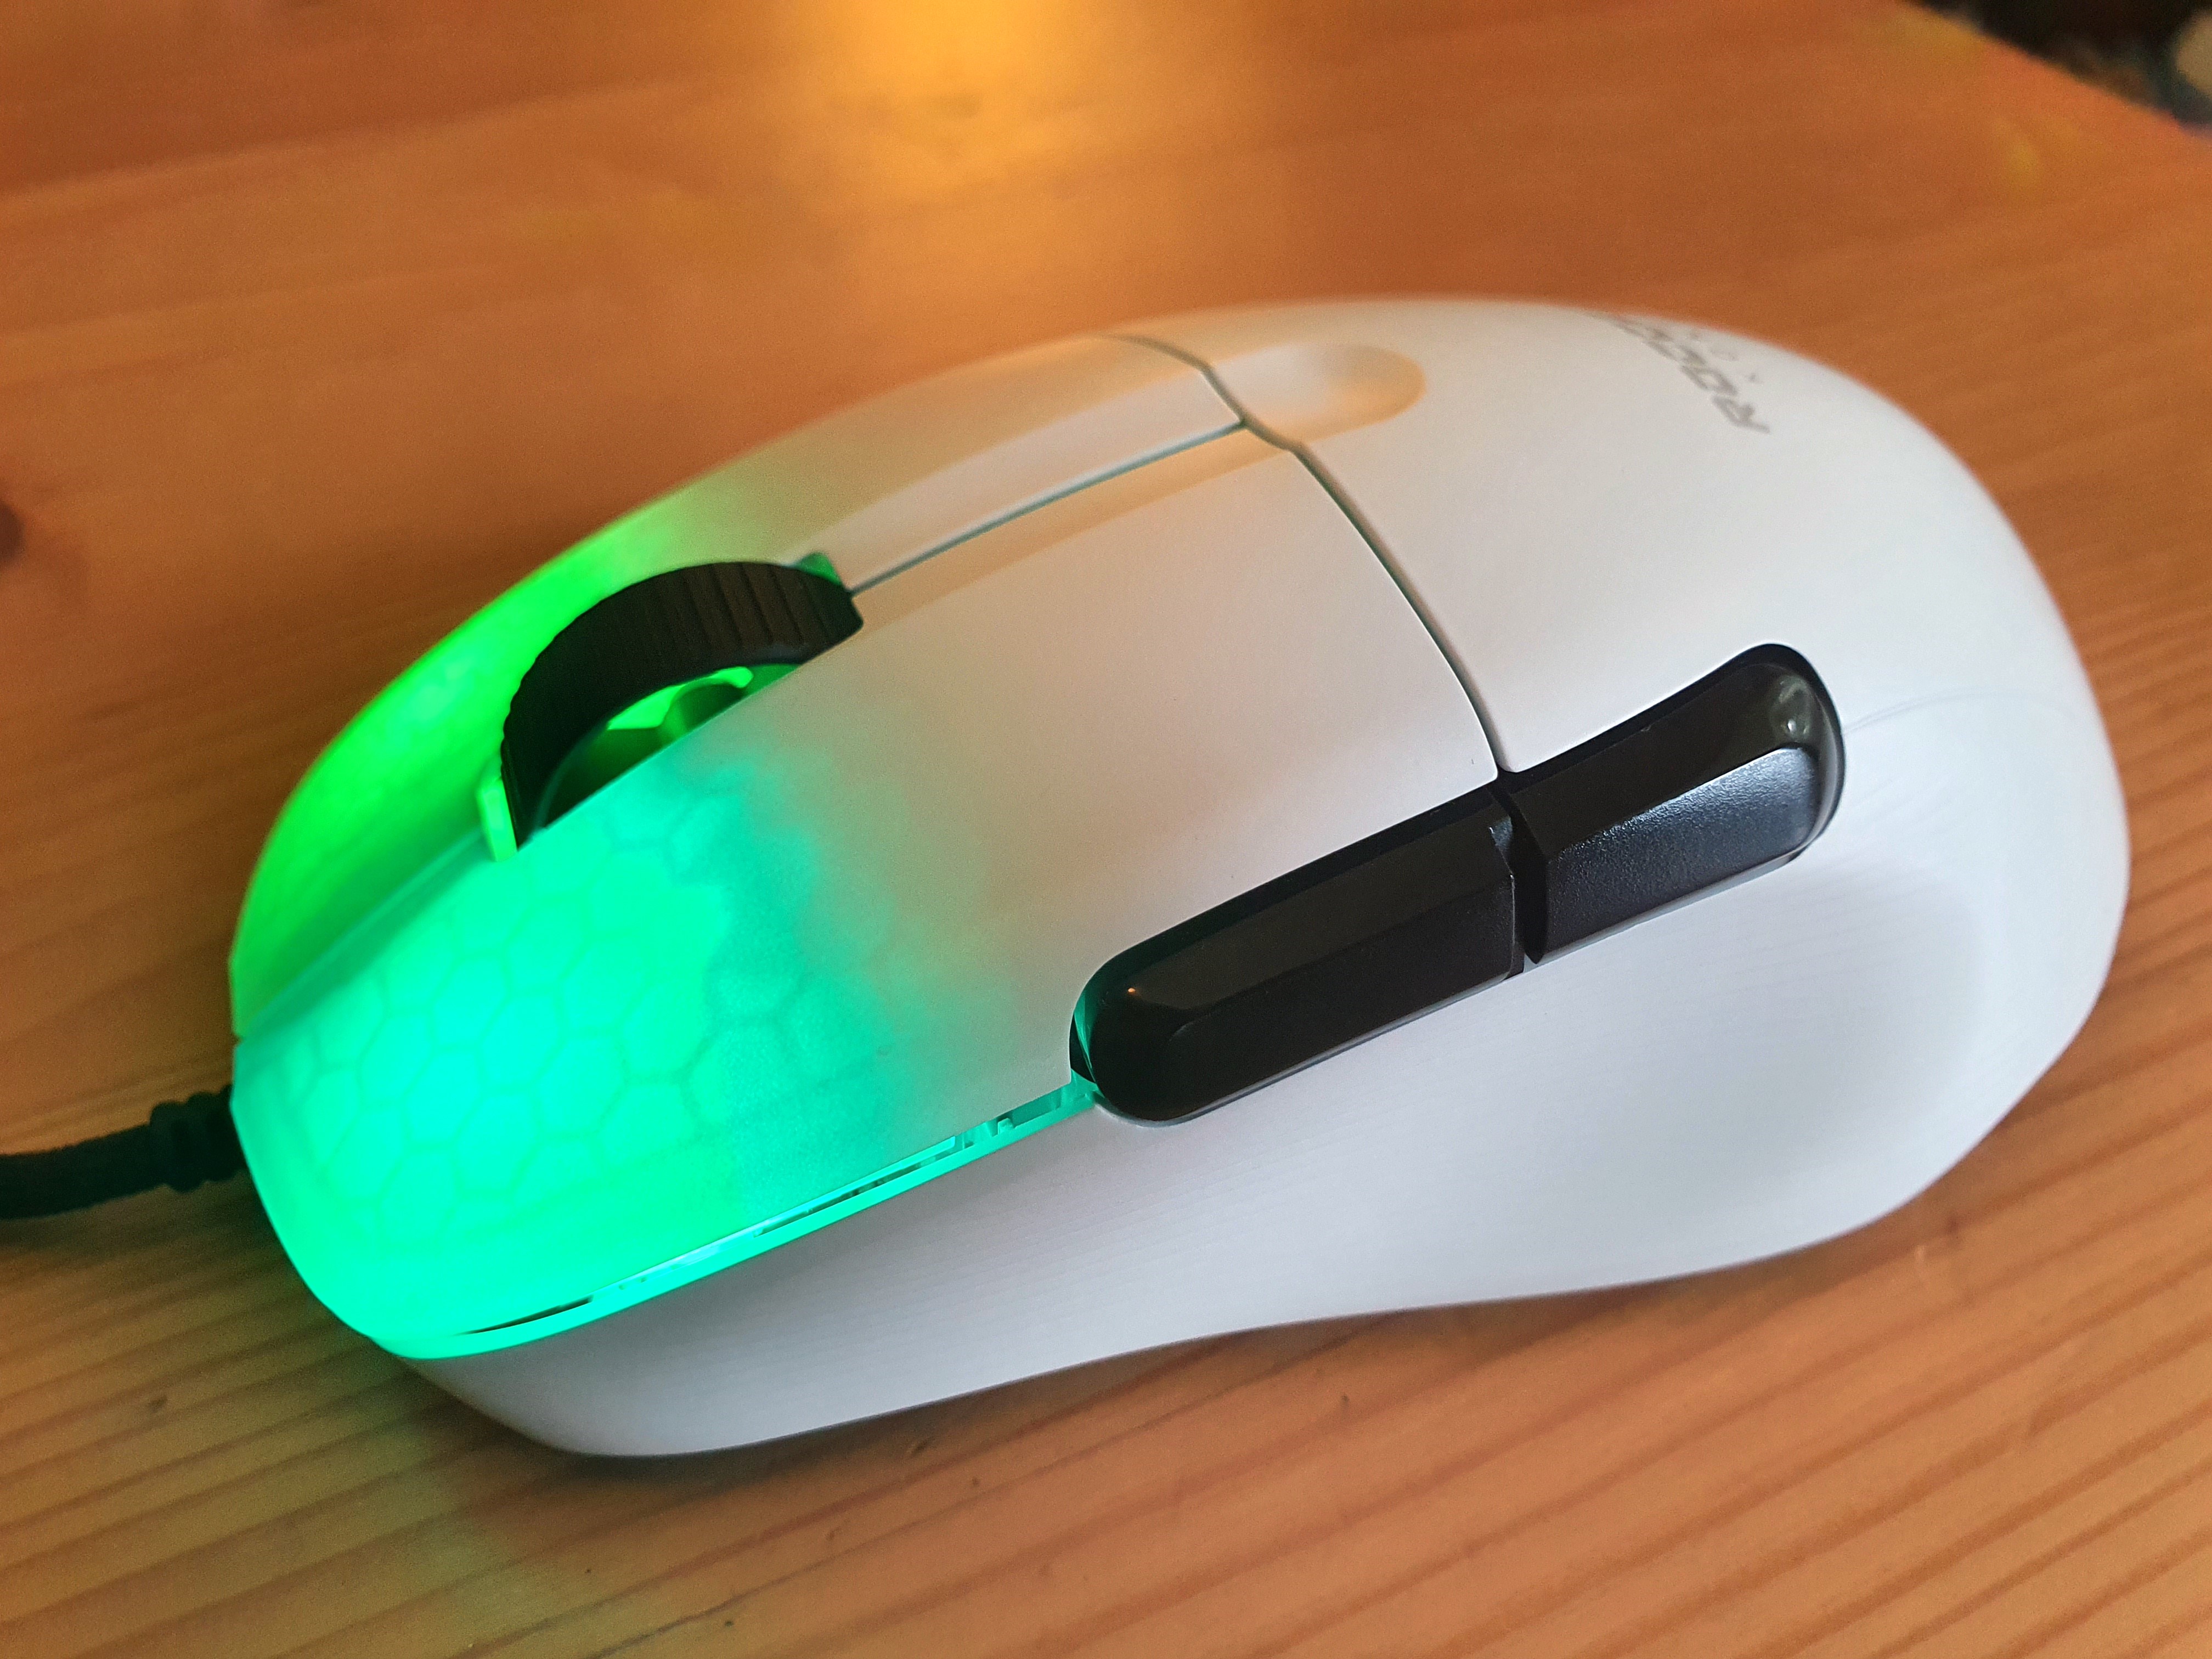 Roccat Kone Pro - Best wired budget gaming mouse runner-up